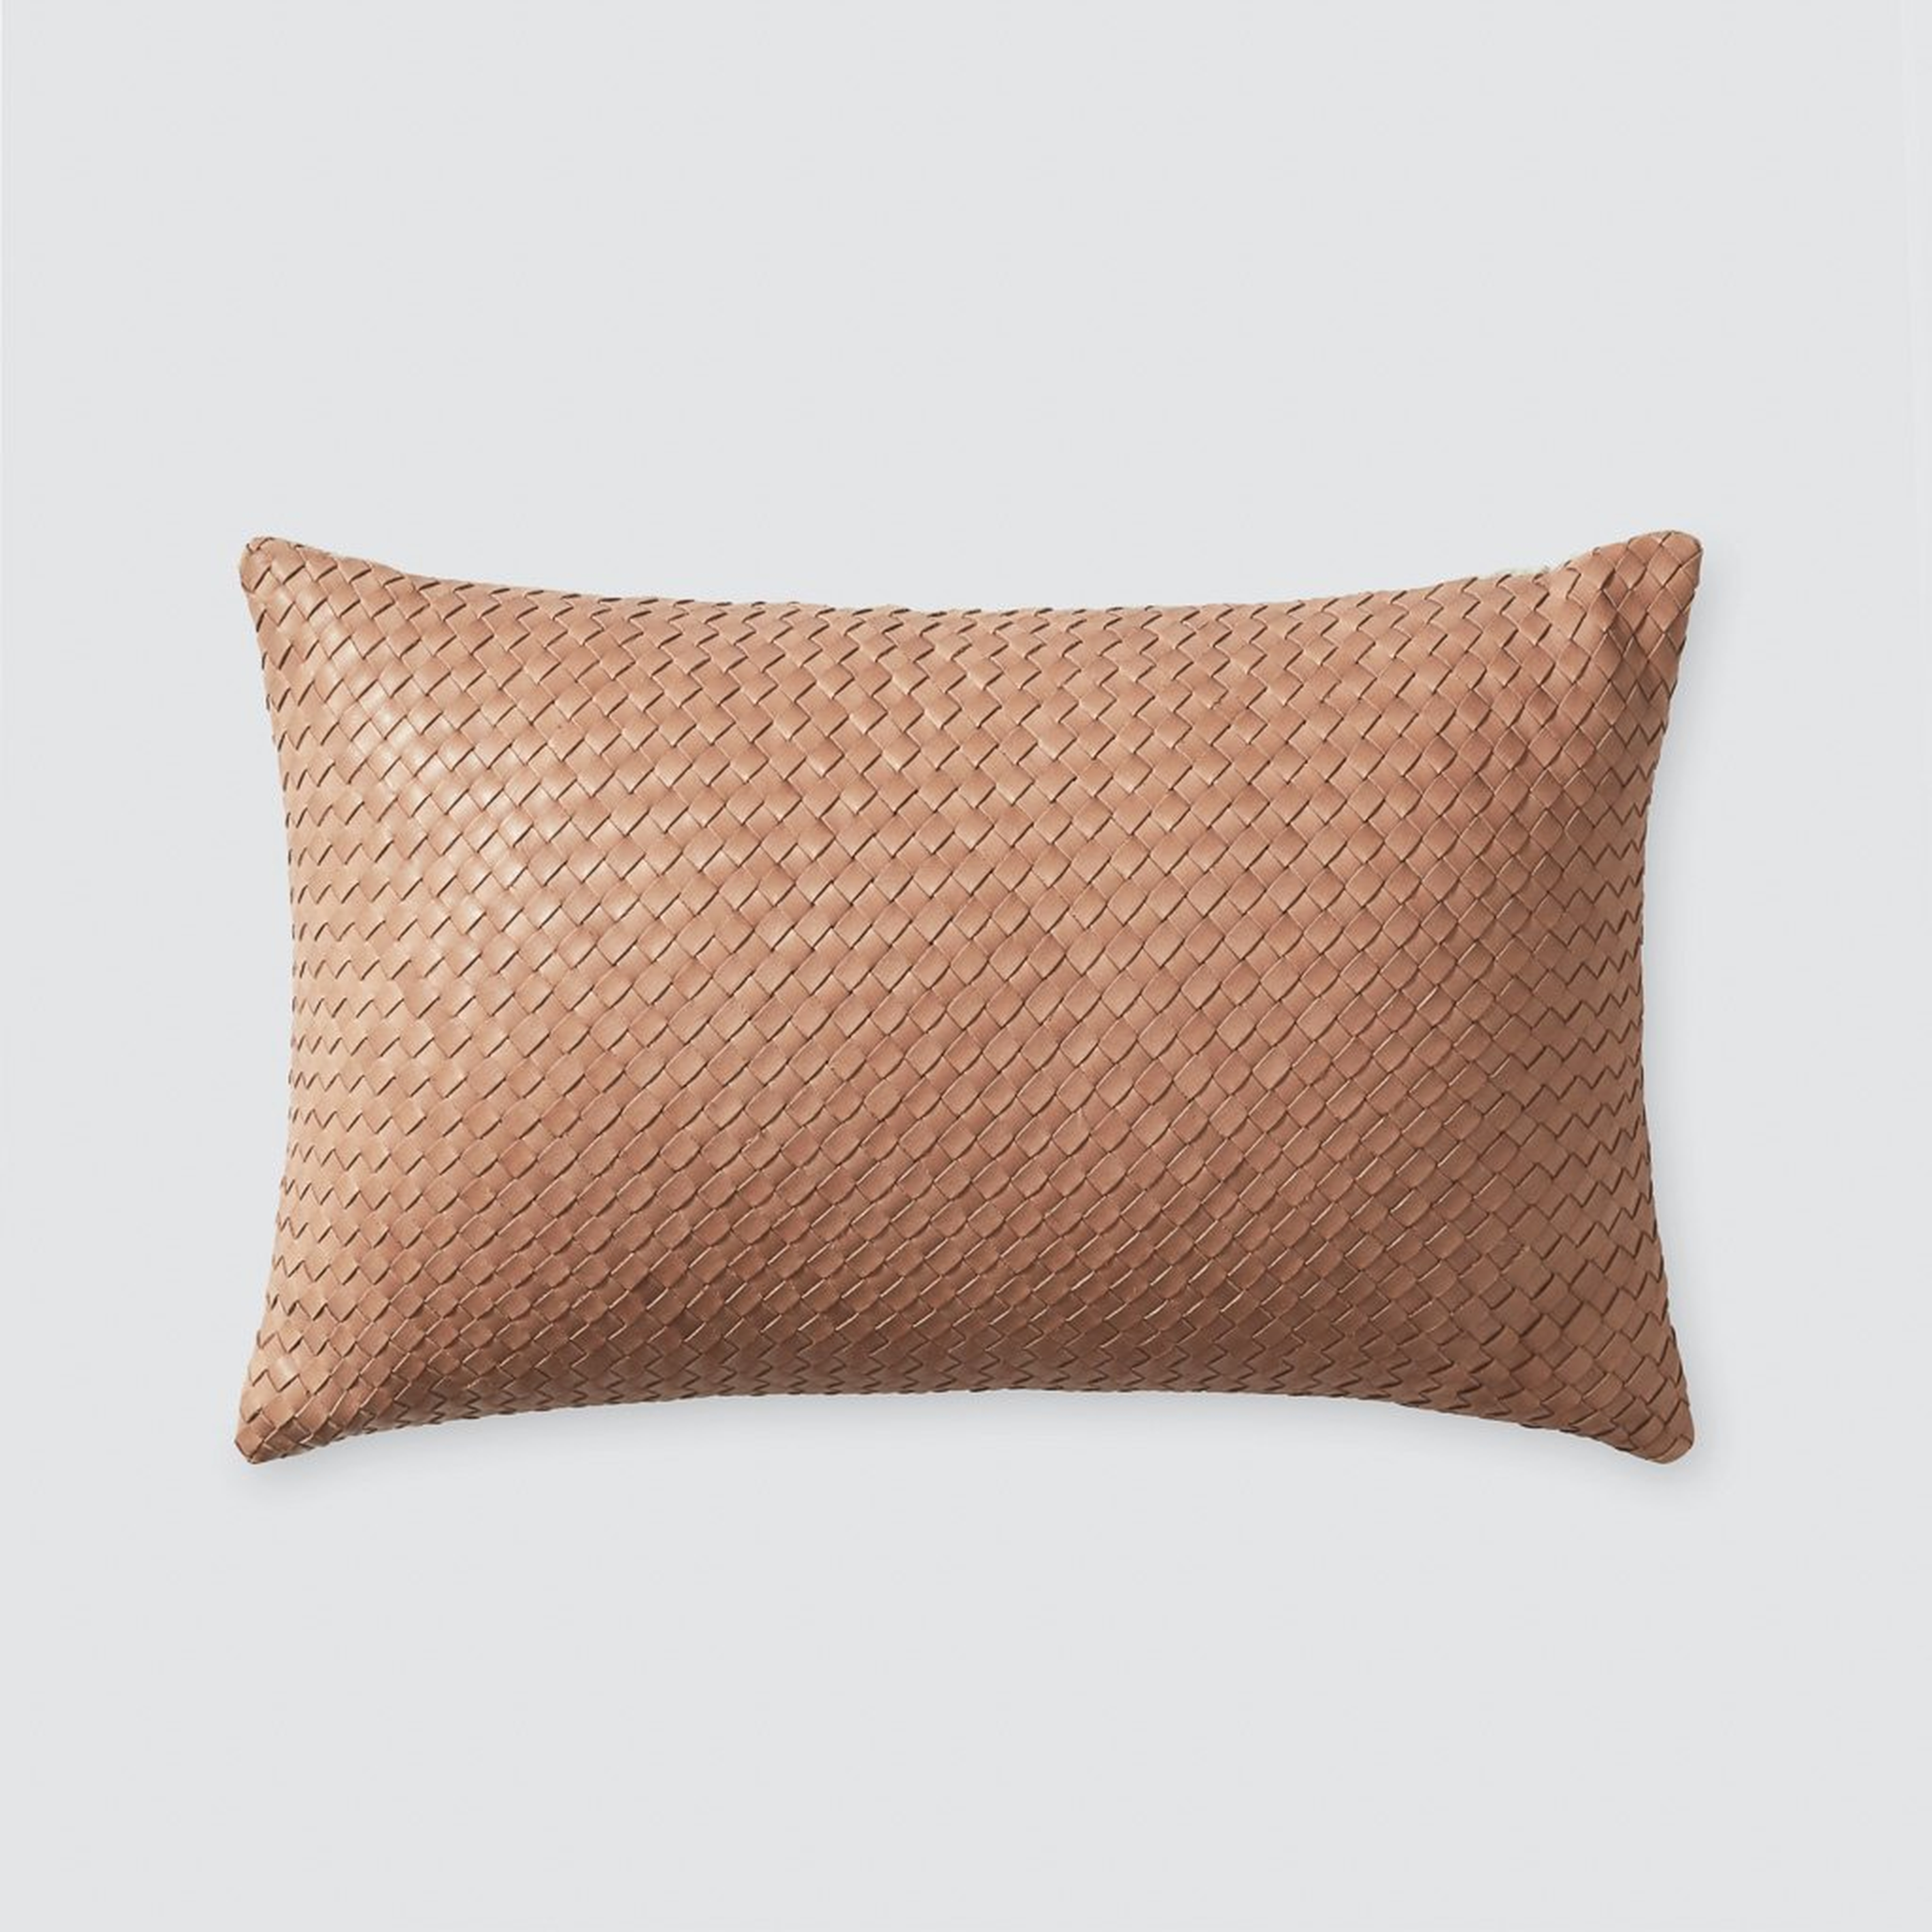 Dhara Leather Lumbar Pillow - Small By The Citizenry - The Citizenry